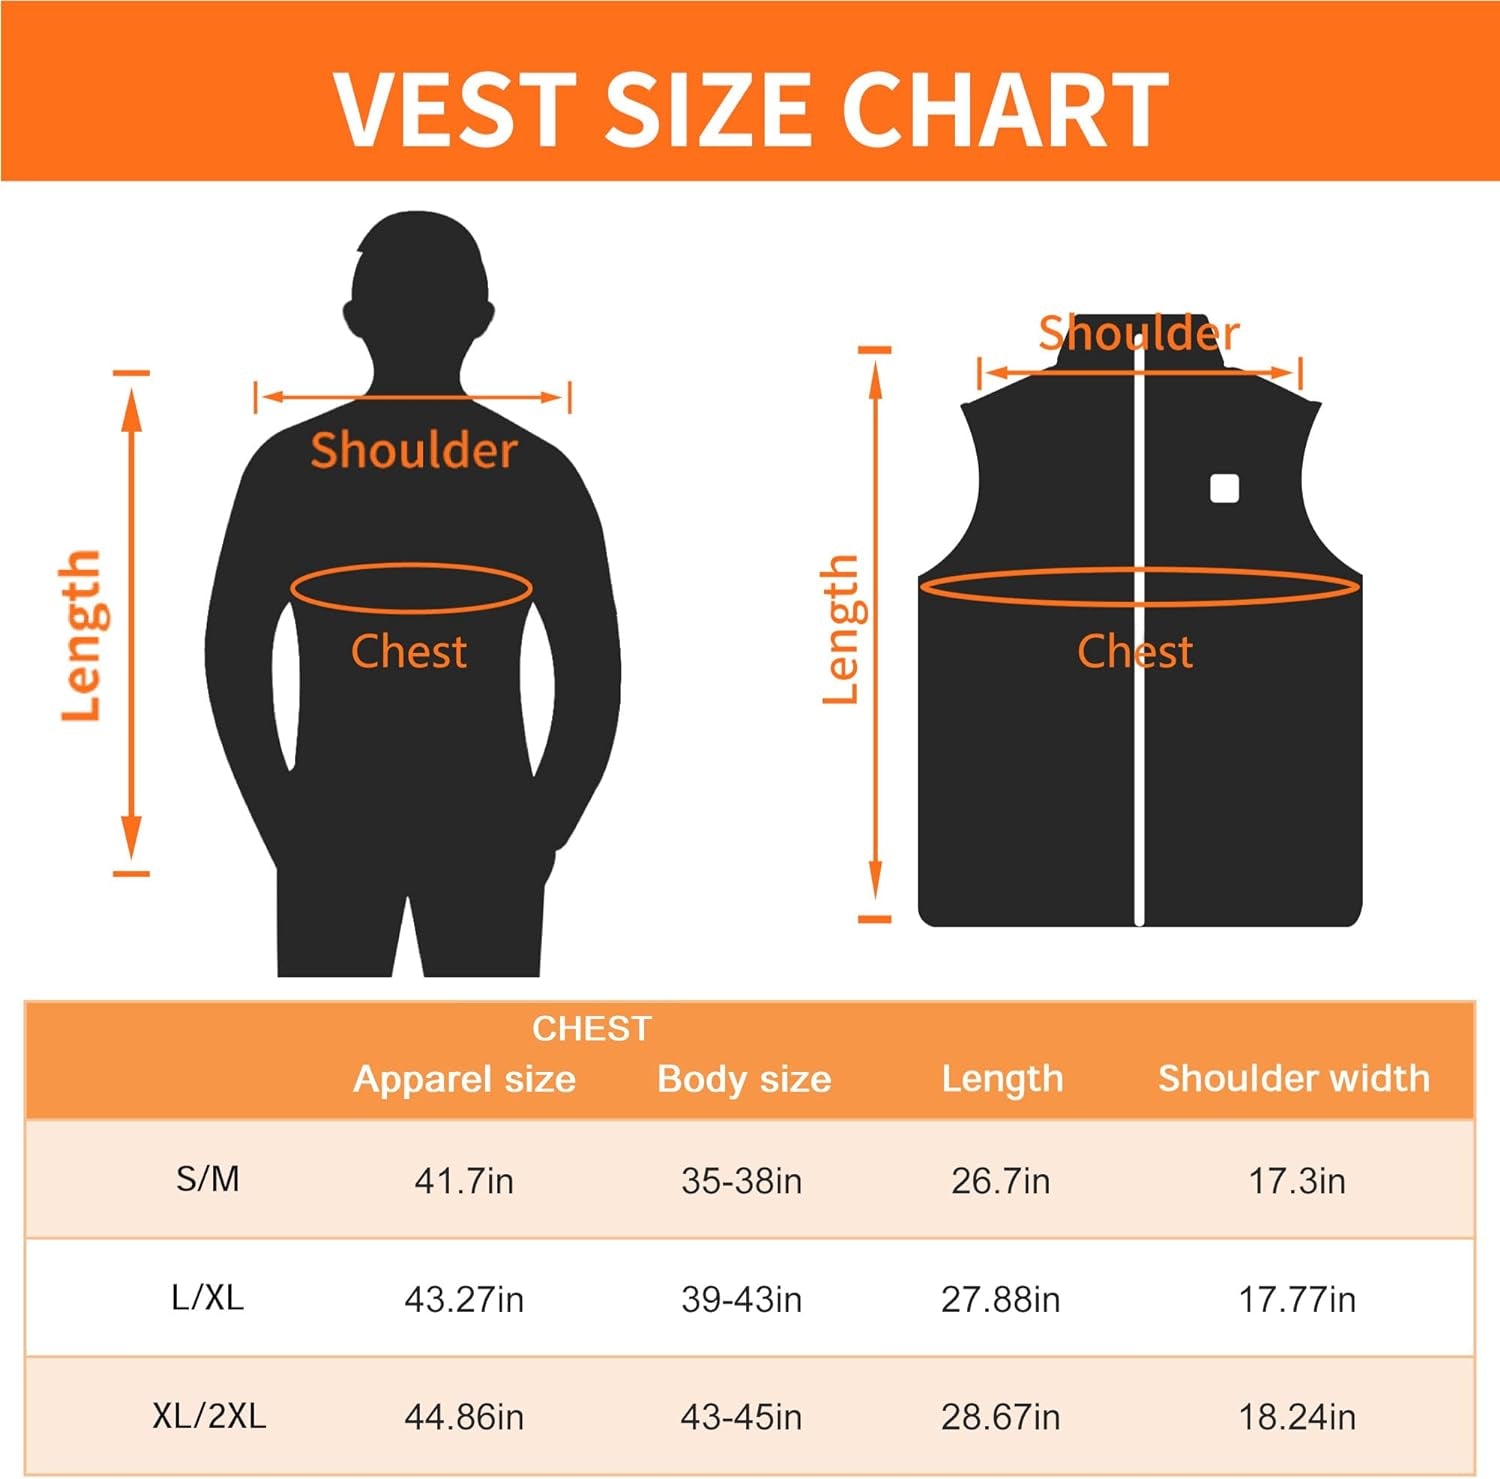 Heated Vest for Men TOSOHMK Warmer Heated Jacket Lightweight Black Electric Warming Vest for Snow Motorcycle Hunting Fishing